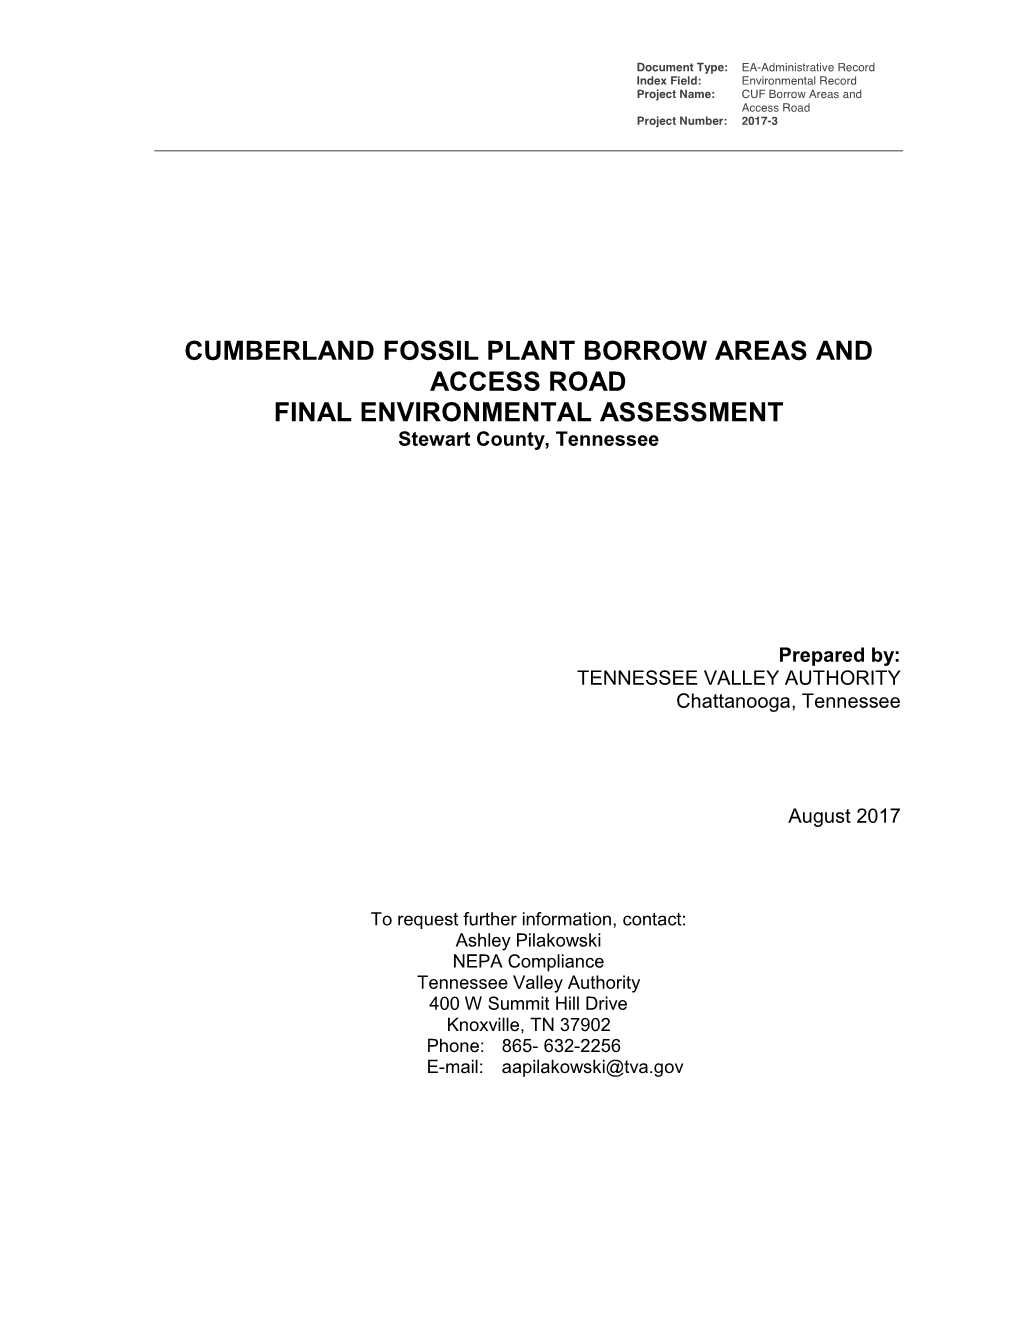 CUMBERLAND FOSSIL PLANT BORROW AREAS and ACCESS ROAD FINAL ENVIRONMENTAL ASSESSMENT Stewart County, Tennessee